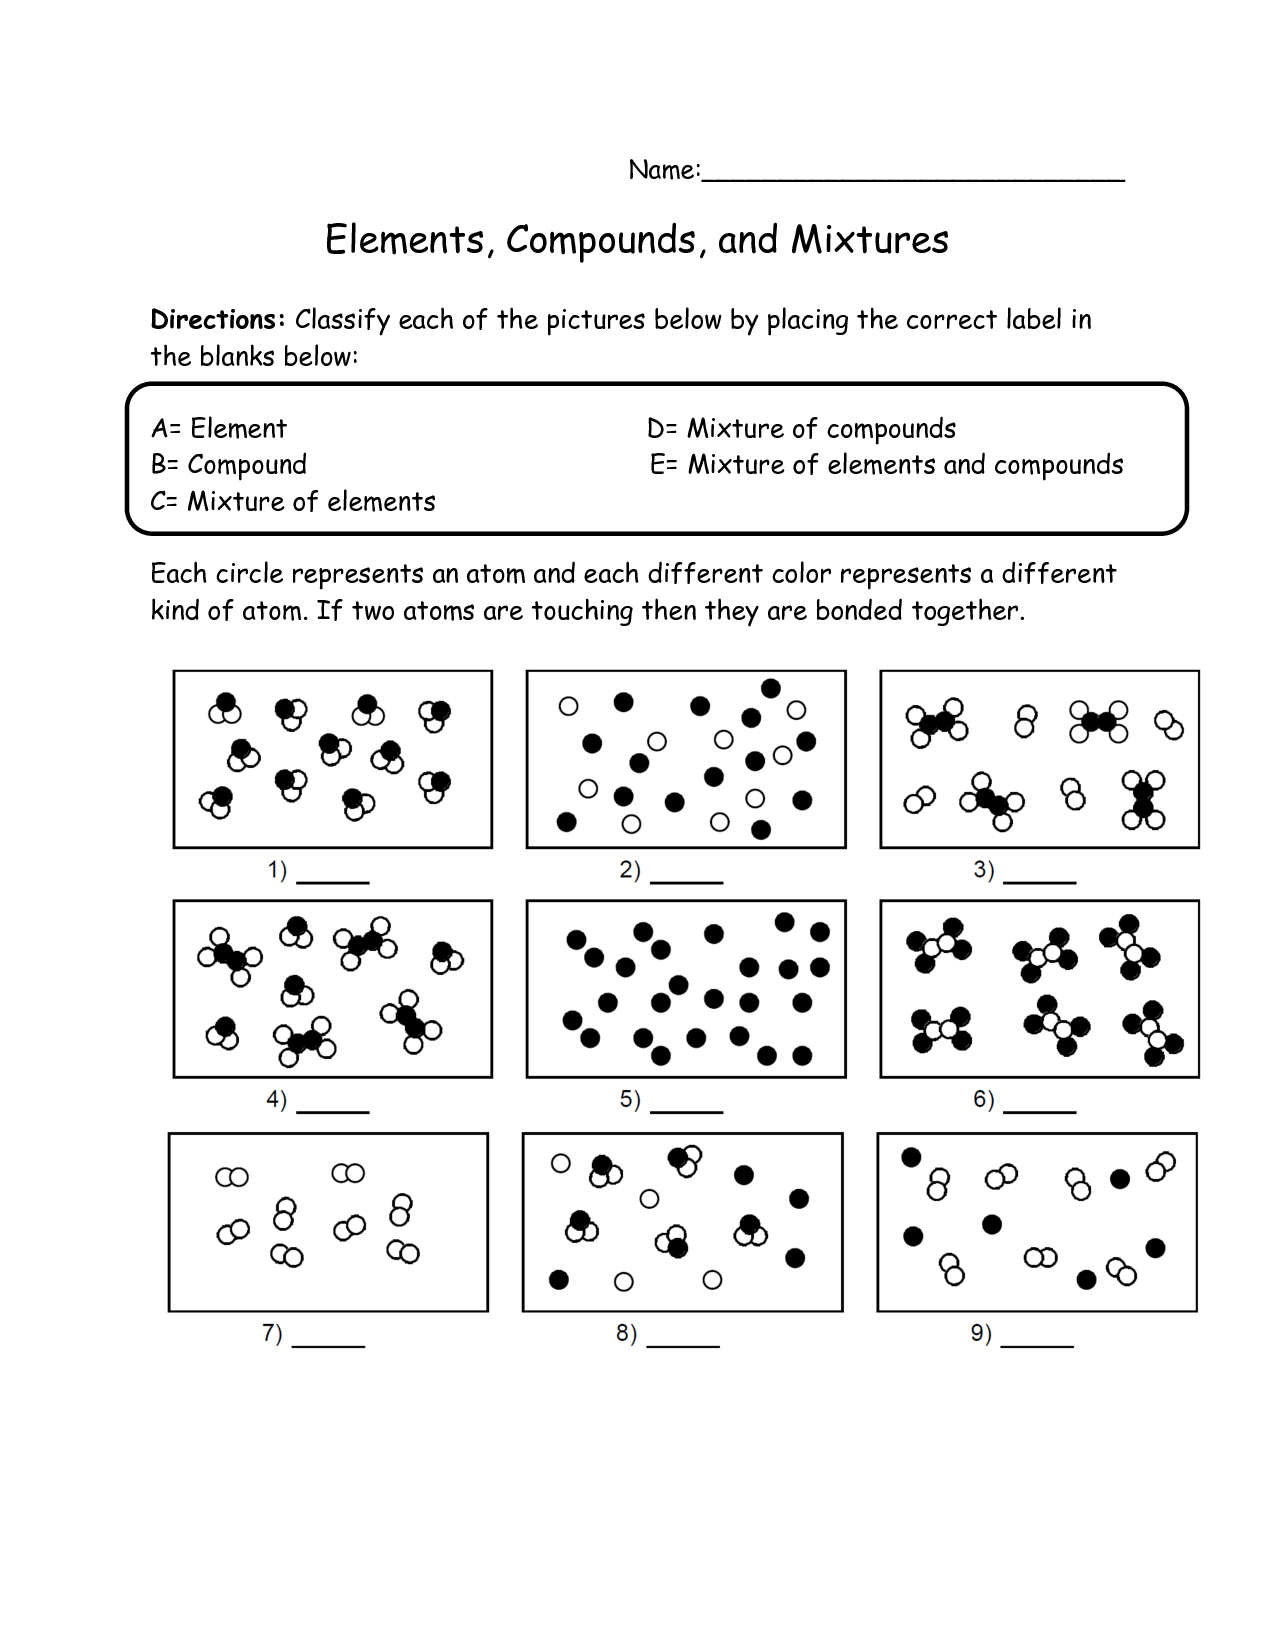 17 Best Images of Elements Compounds And Mixtures Worksheet Answer Key  Element Compound 